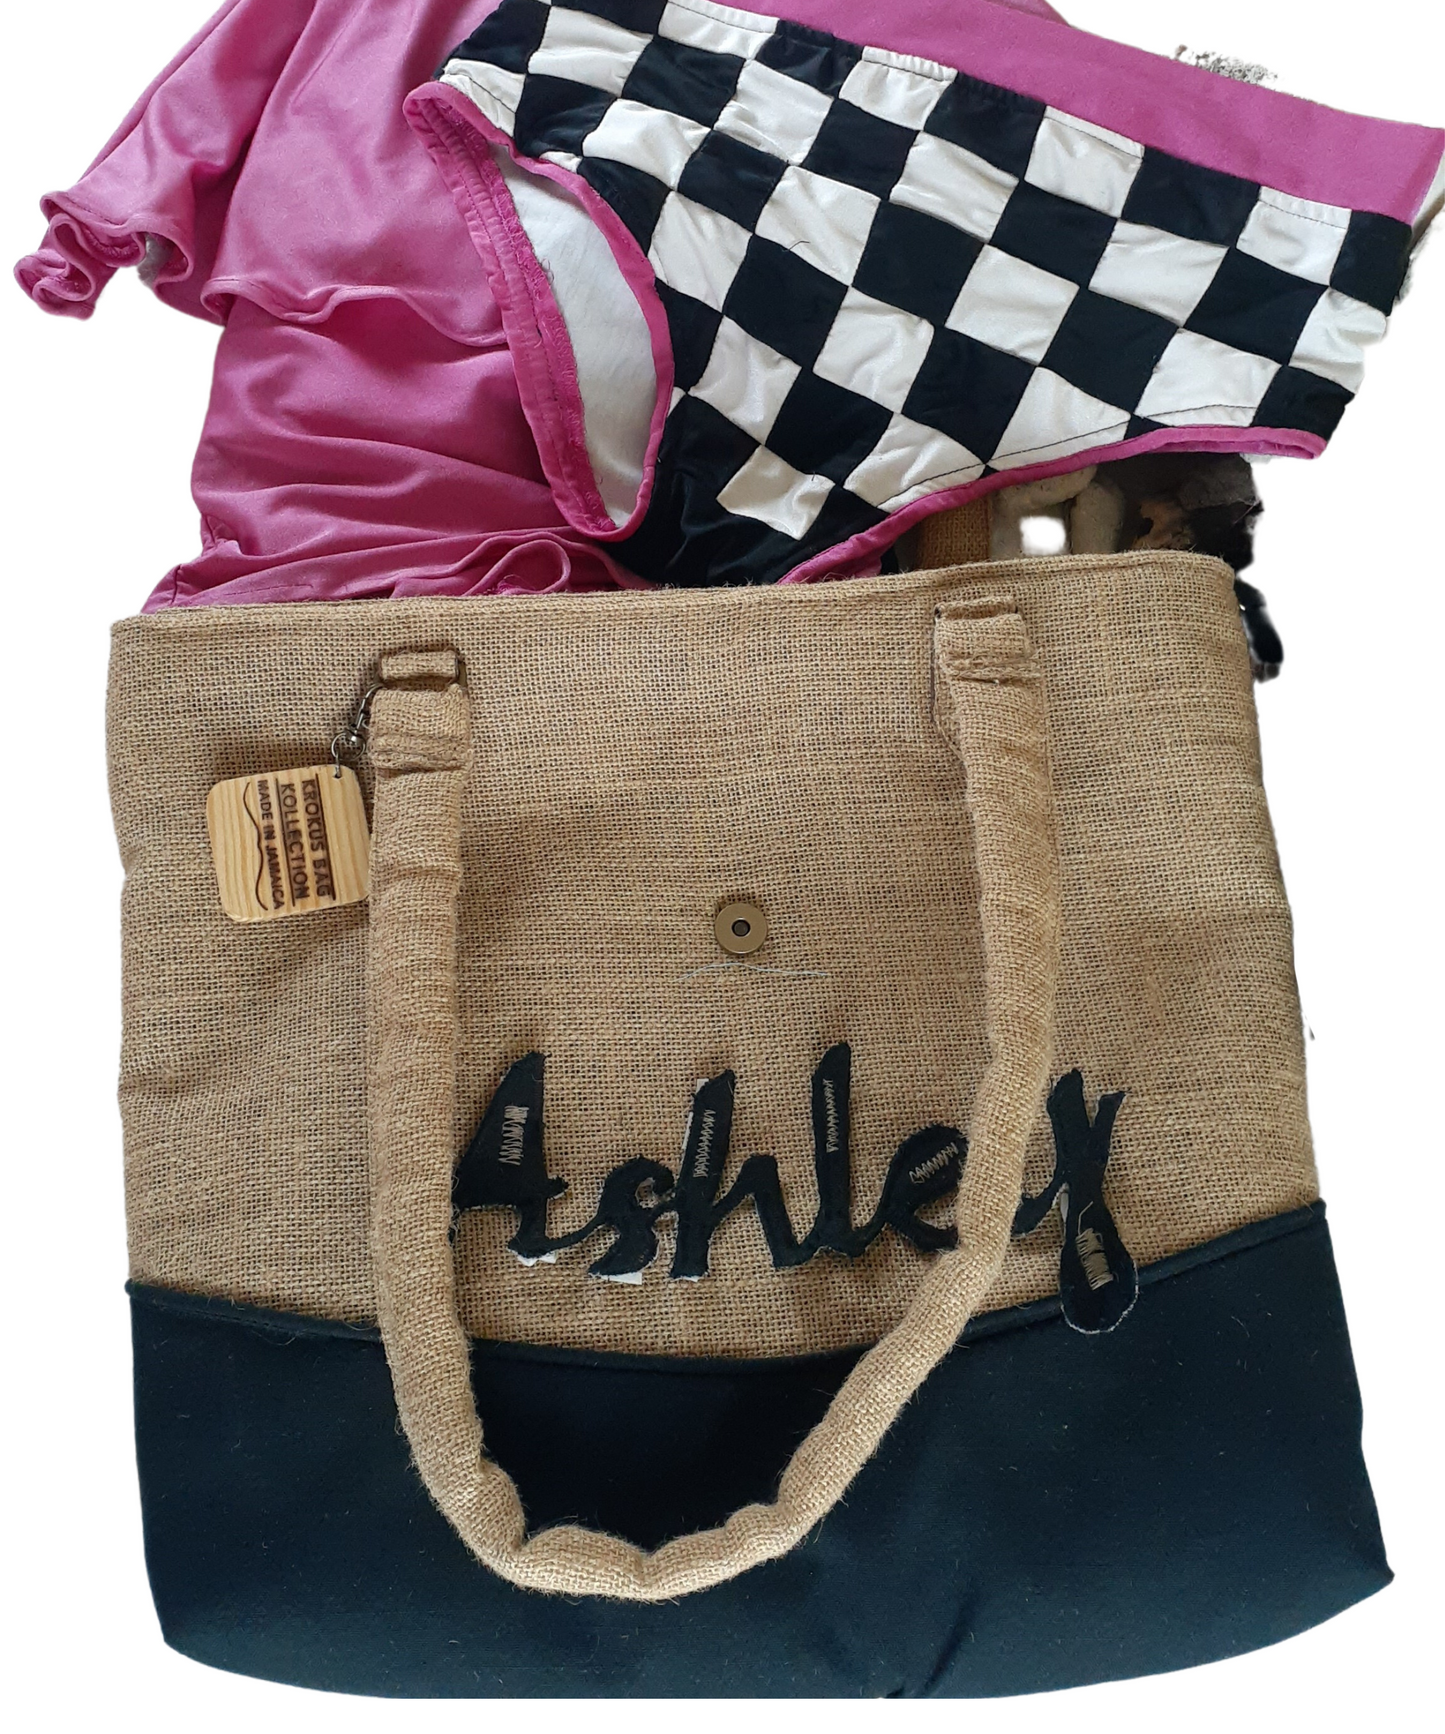 Personalized Handmade Jute/Burlap/Linen Tote and Crossbody Self-Care Bag Set with Scarf